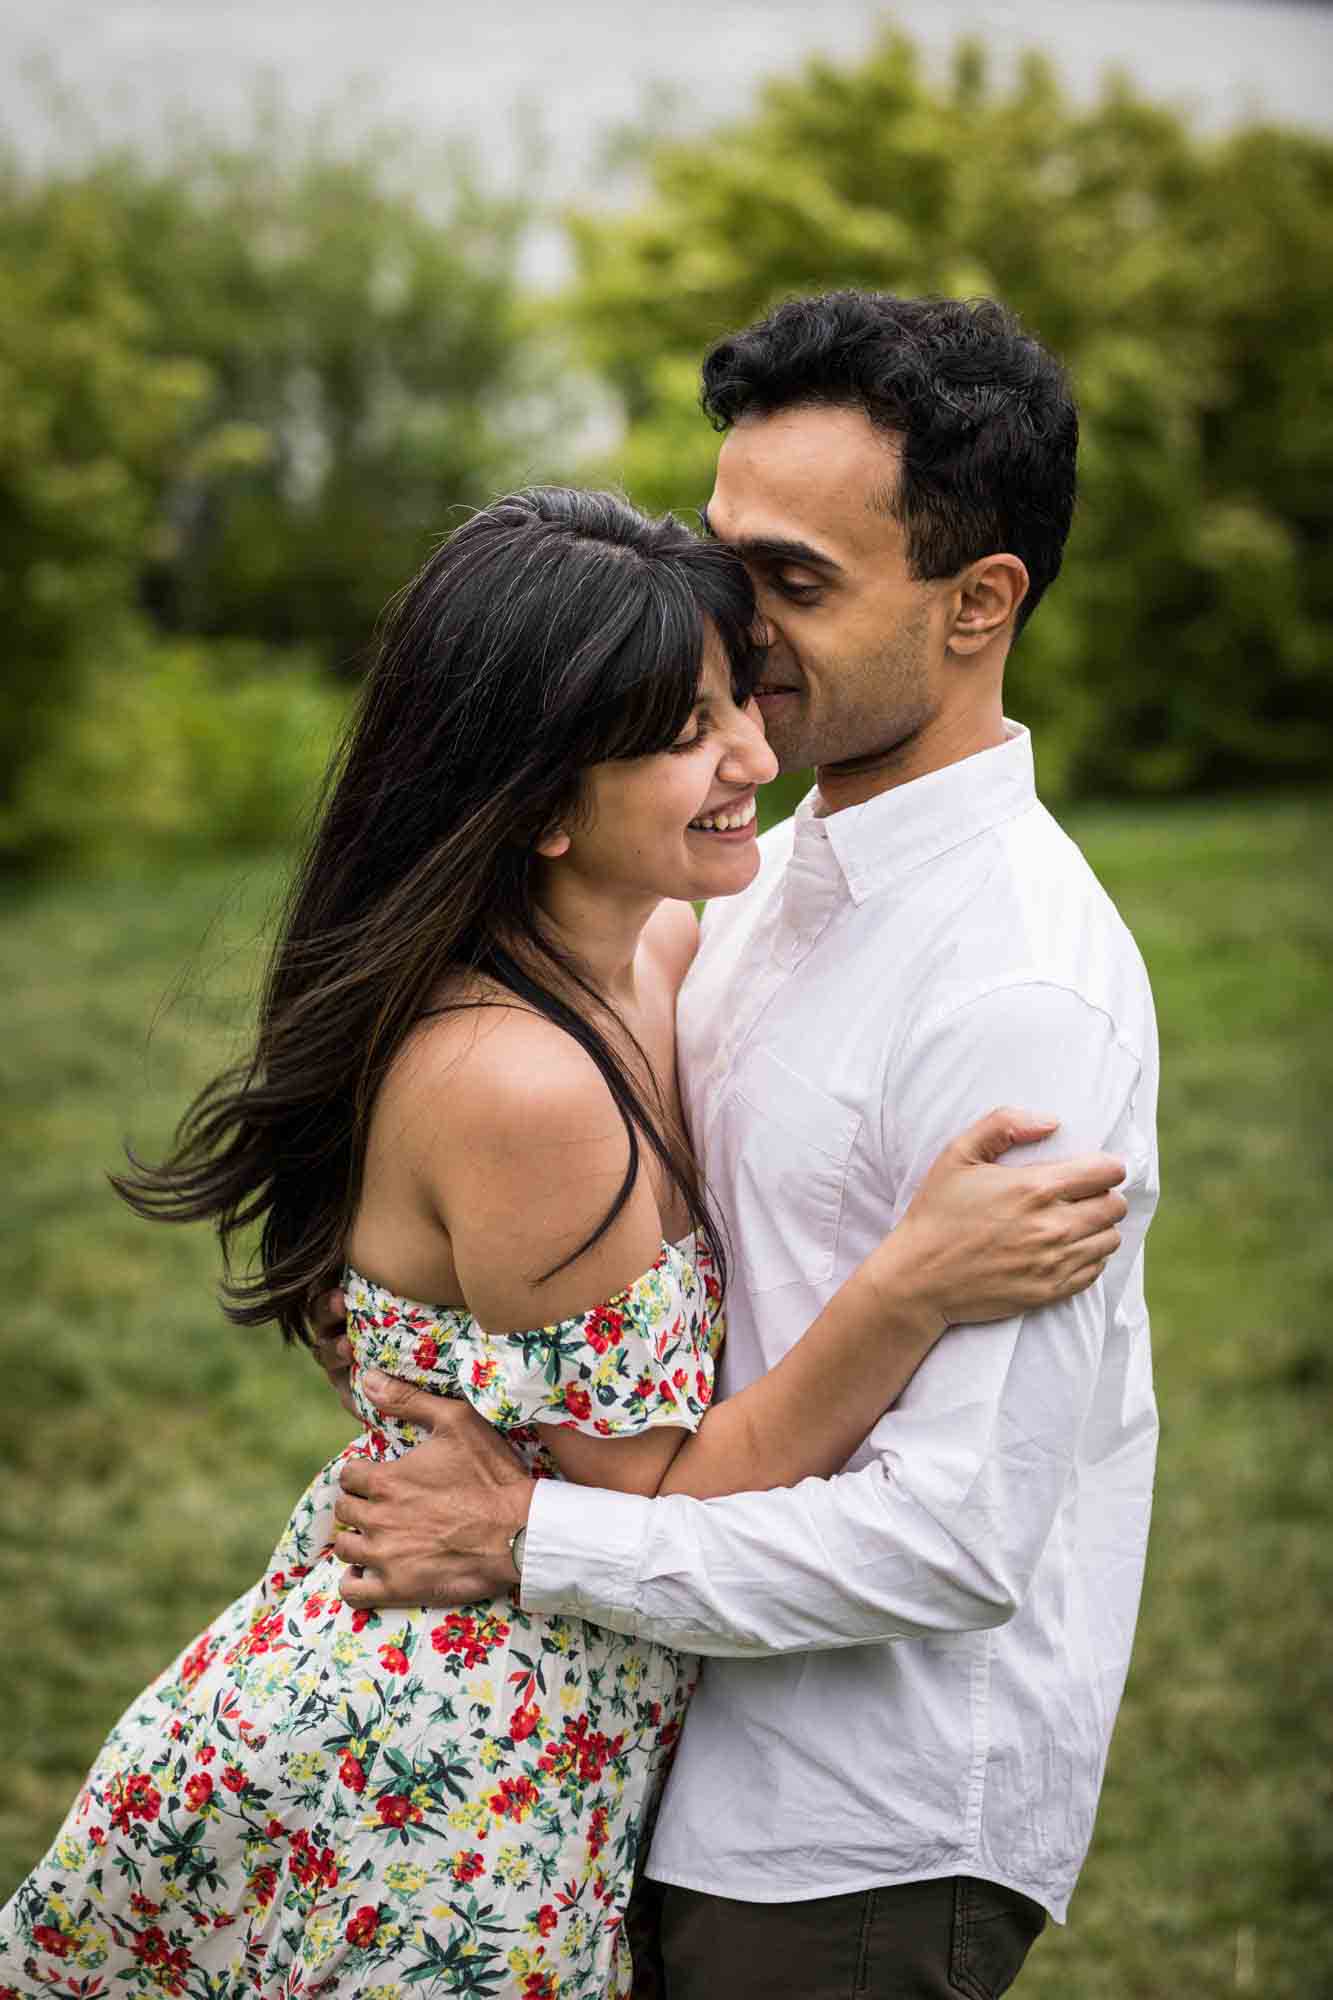 Couple dancing in grass during a Brooklyn Bridge Park engagement photo shoot